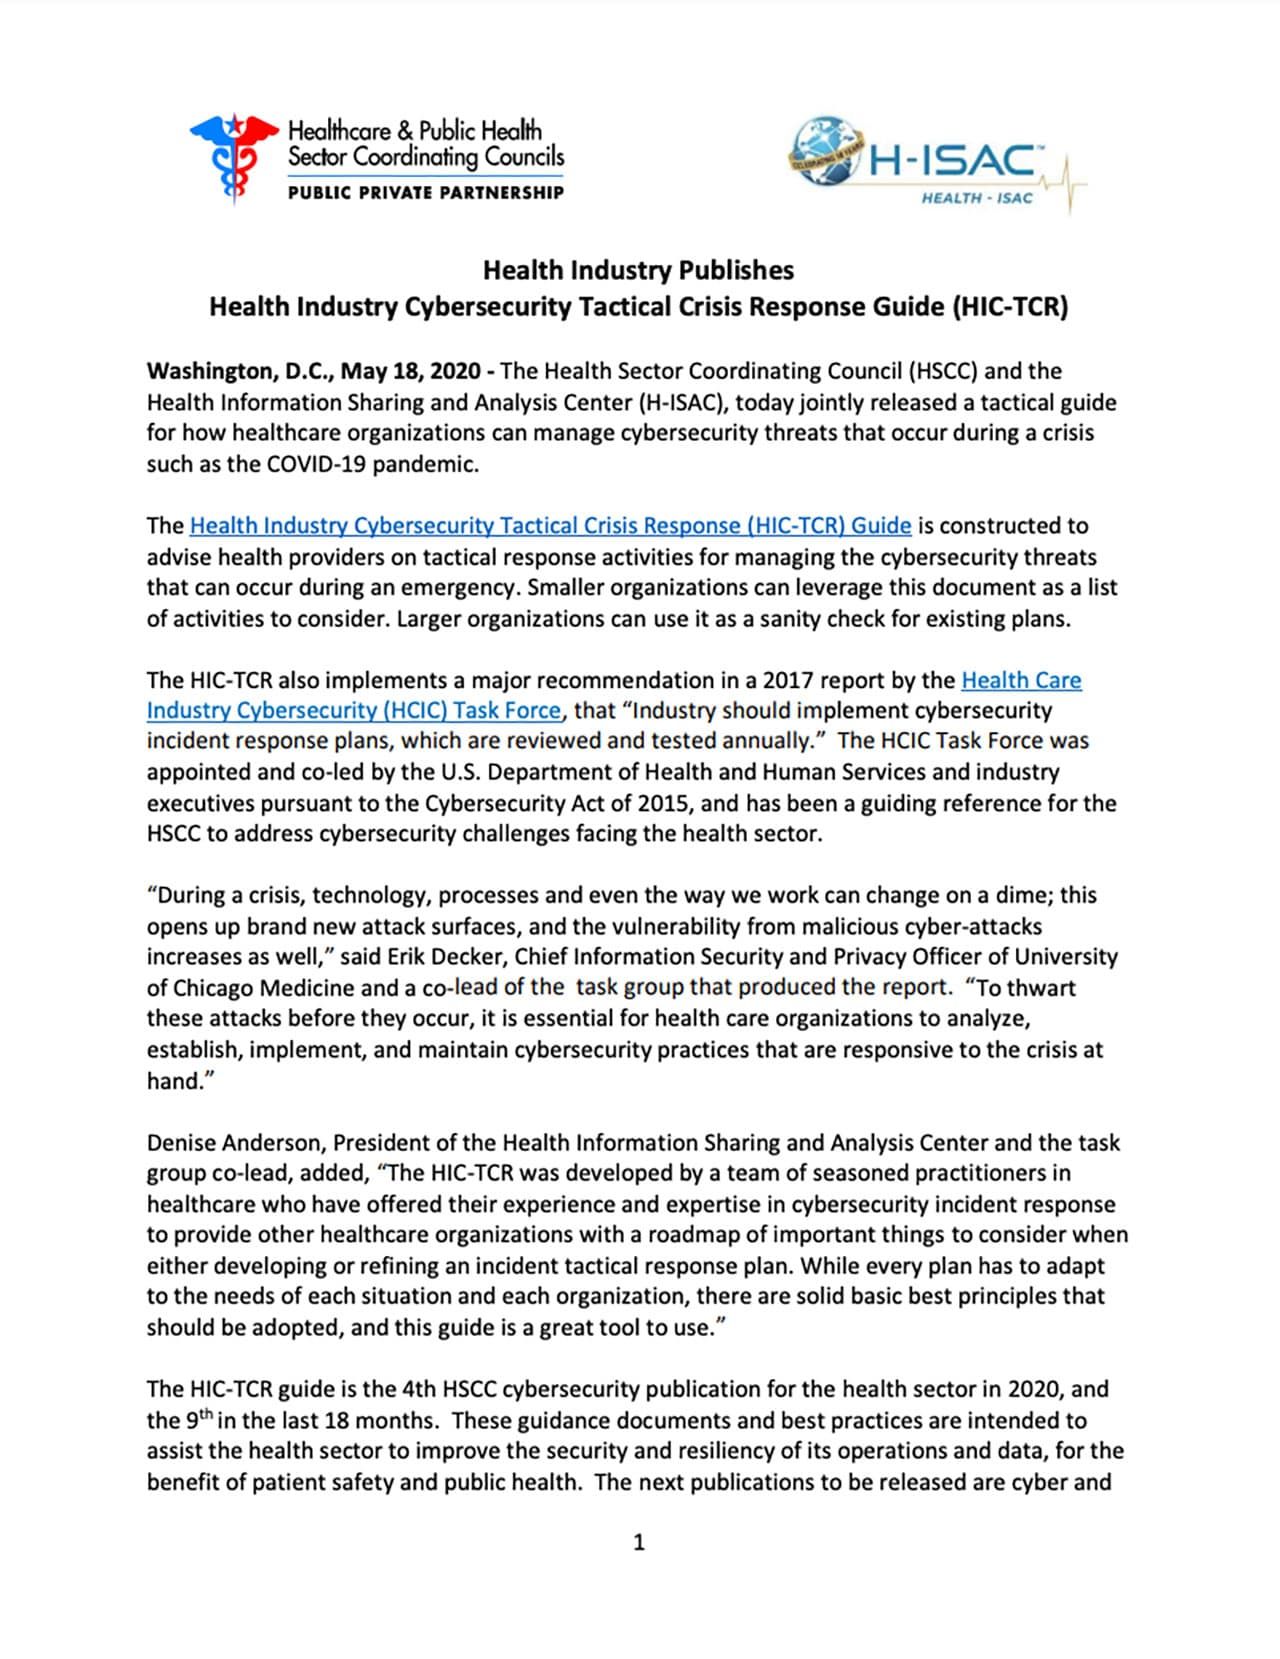 05/18/2020:  Health Industry Publishes Health Industry Cybersecurity Tactical Crisis Response Guide (HIC-TCR)